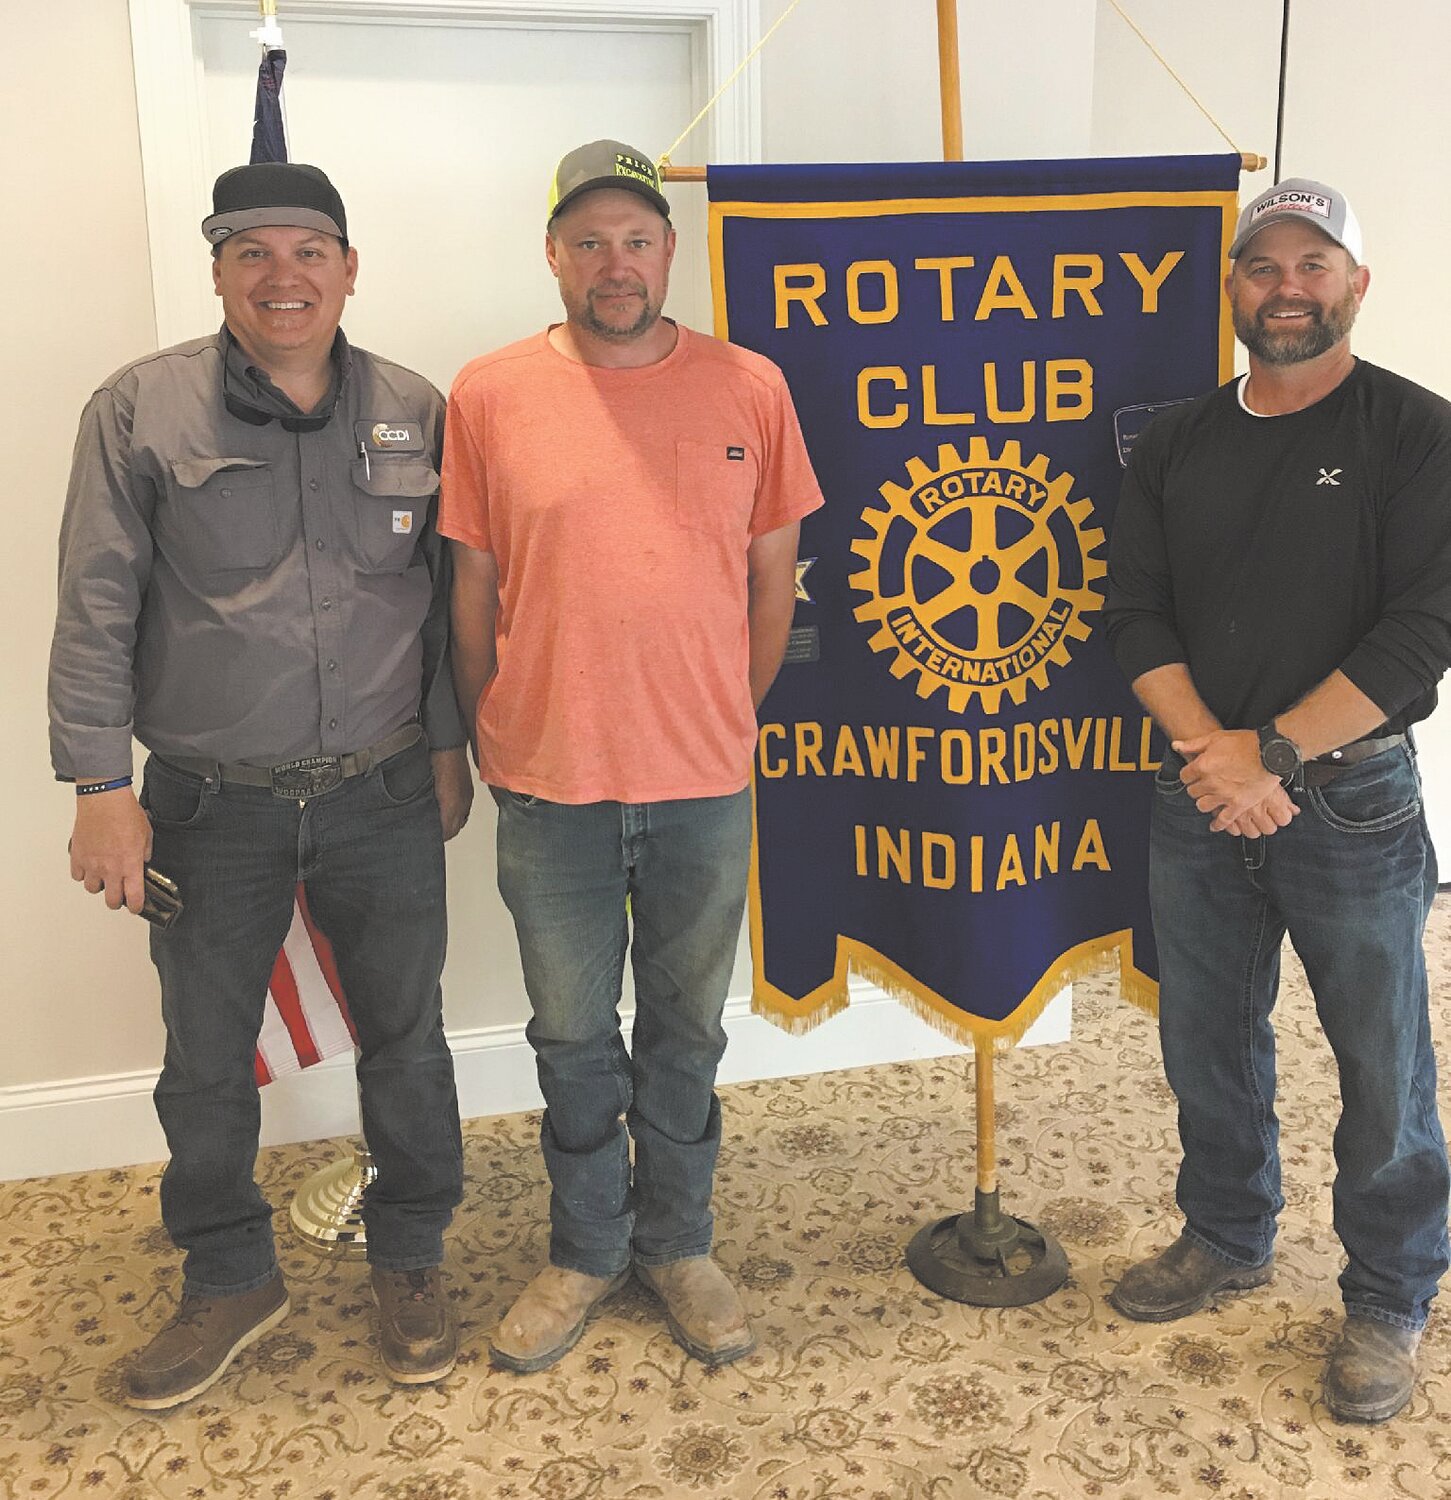 A rodeo in Crawfordsville? Yes, there is one a month on Saturday from April through October. The owners of the rodeo, Glenn Price, Emanual Allbrook and Bobby Cunningham, spoke to the Crawfordsville Rotary Club on May 24. The rodeo known as PAC Midwest Rodeo Co. is located at 235 E. U.S. 136 which is where the old drive-in theater used to be. The following events can be found at the rodeo: sheep riding.for children, calf riding for youth and bull riding and barrel racing are open. Admission is $15 per person. Children younger than 10 years of age are admitted free. Concessions and vendors are available. Bring.chairs, blankets and coolers and enjoy a great evening. Gates open at 4 p.m. For more information, visit them on Facebook at PACMidwestRodeoCo.